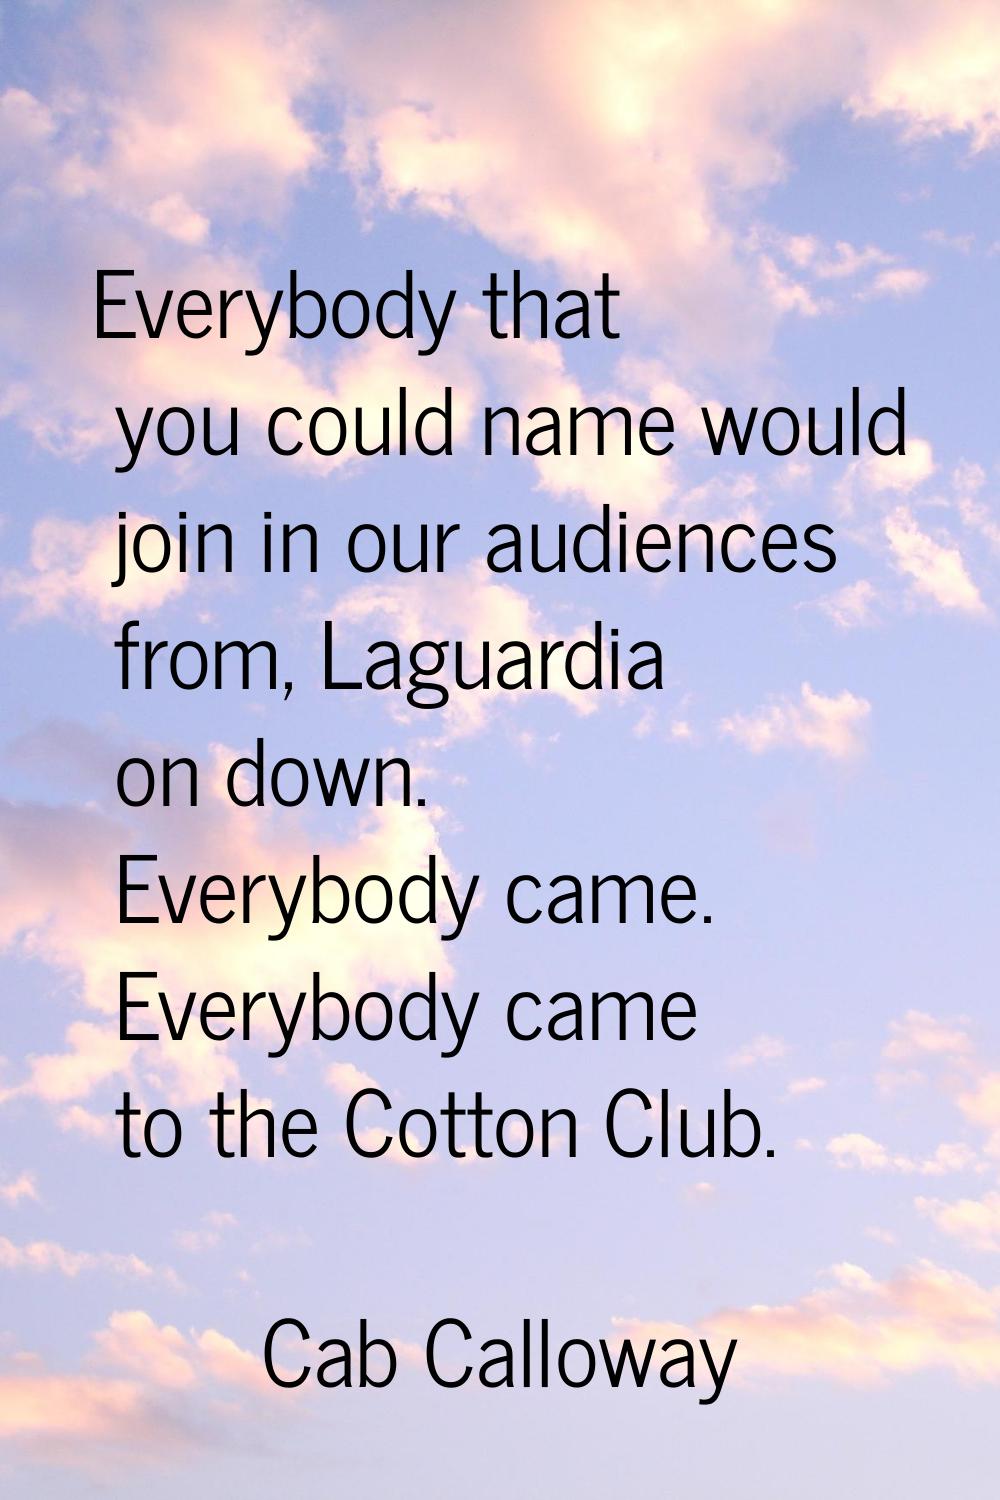 Everybody that you could name would join in our audiences from, Laguardia on down. Everybody came. 